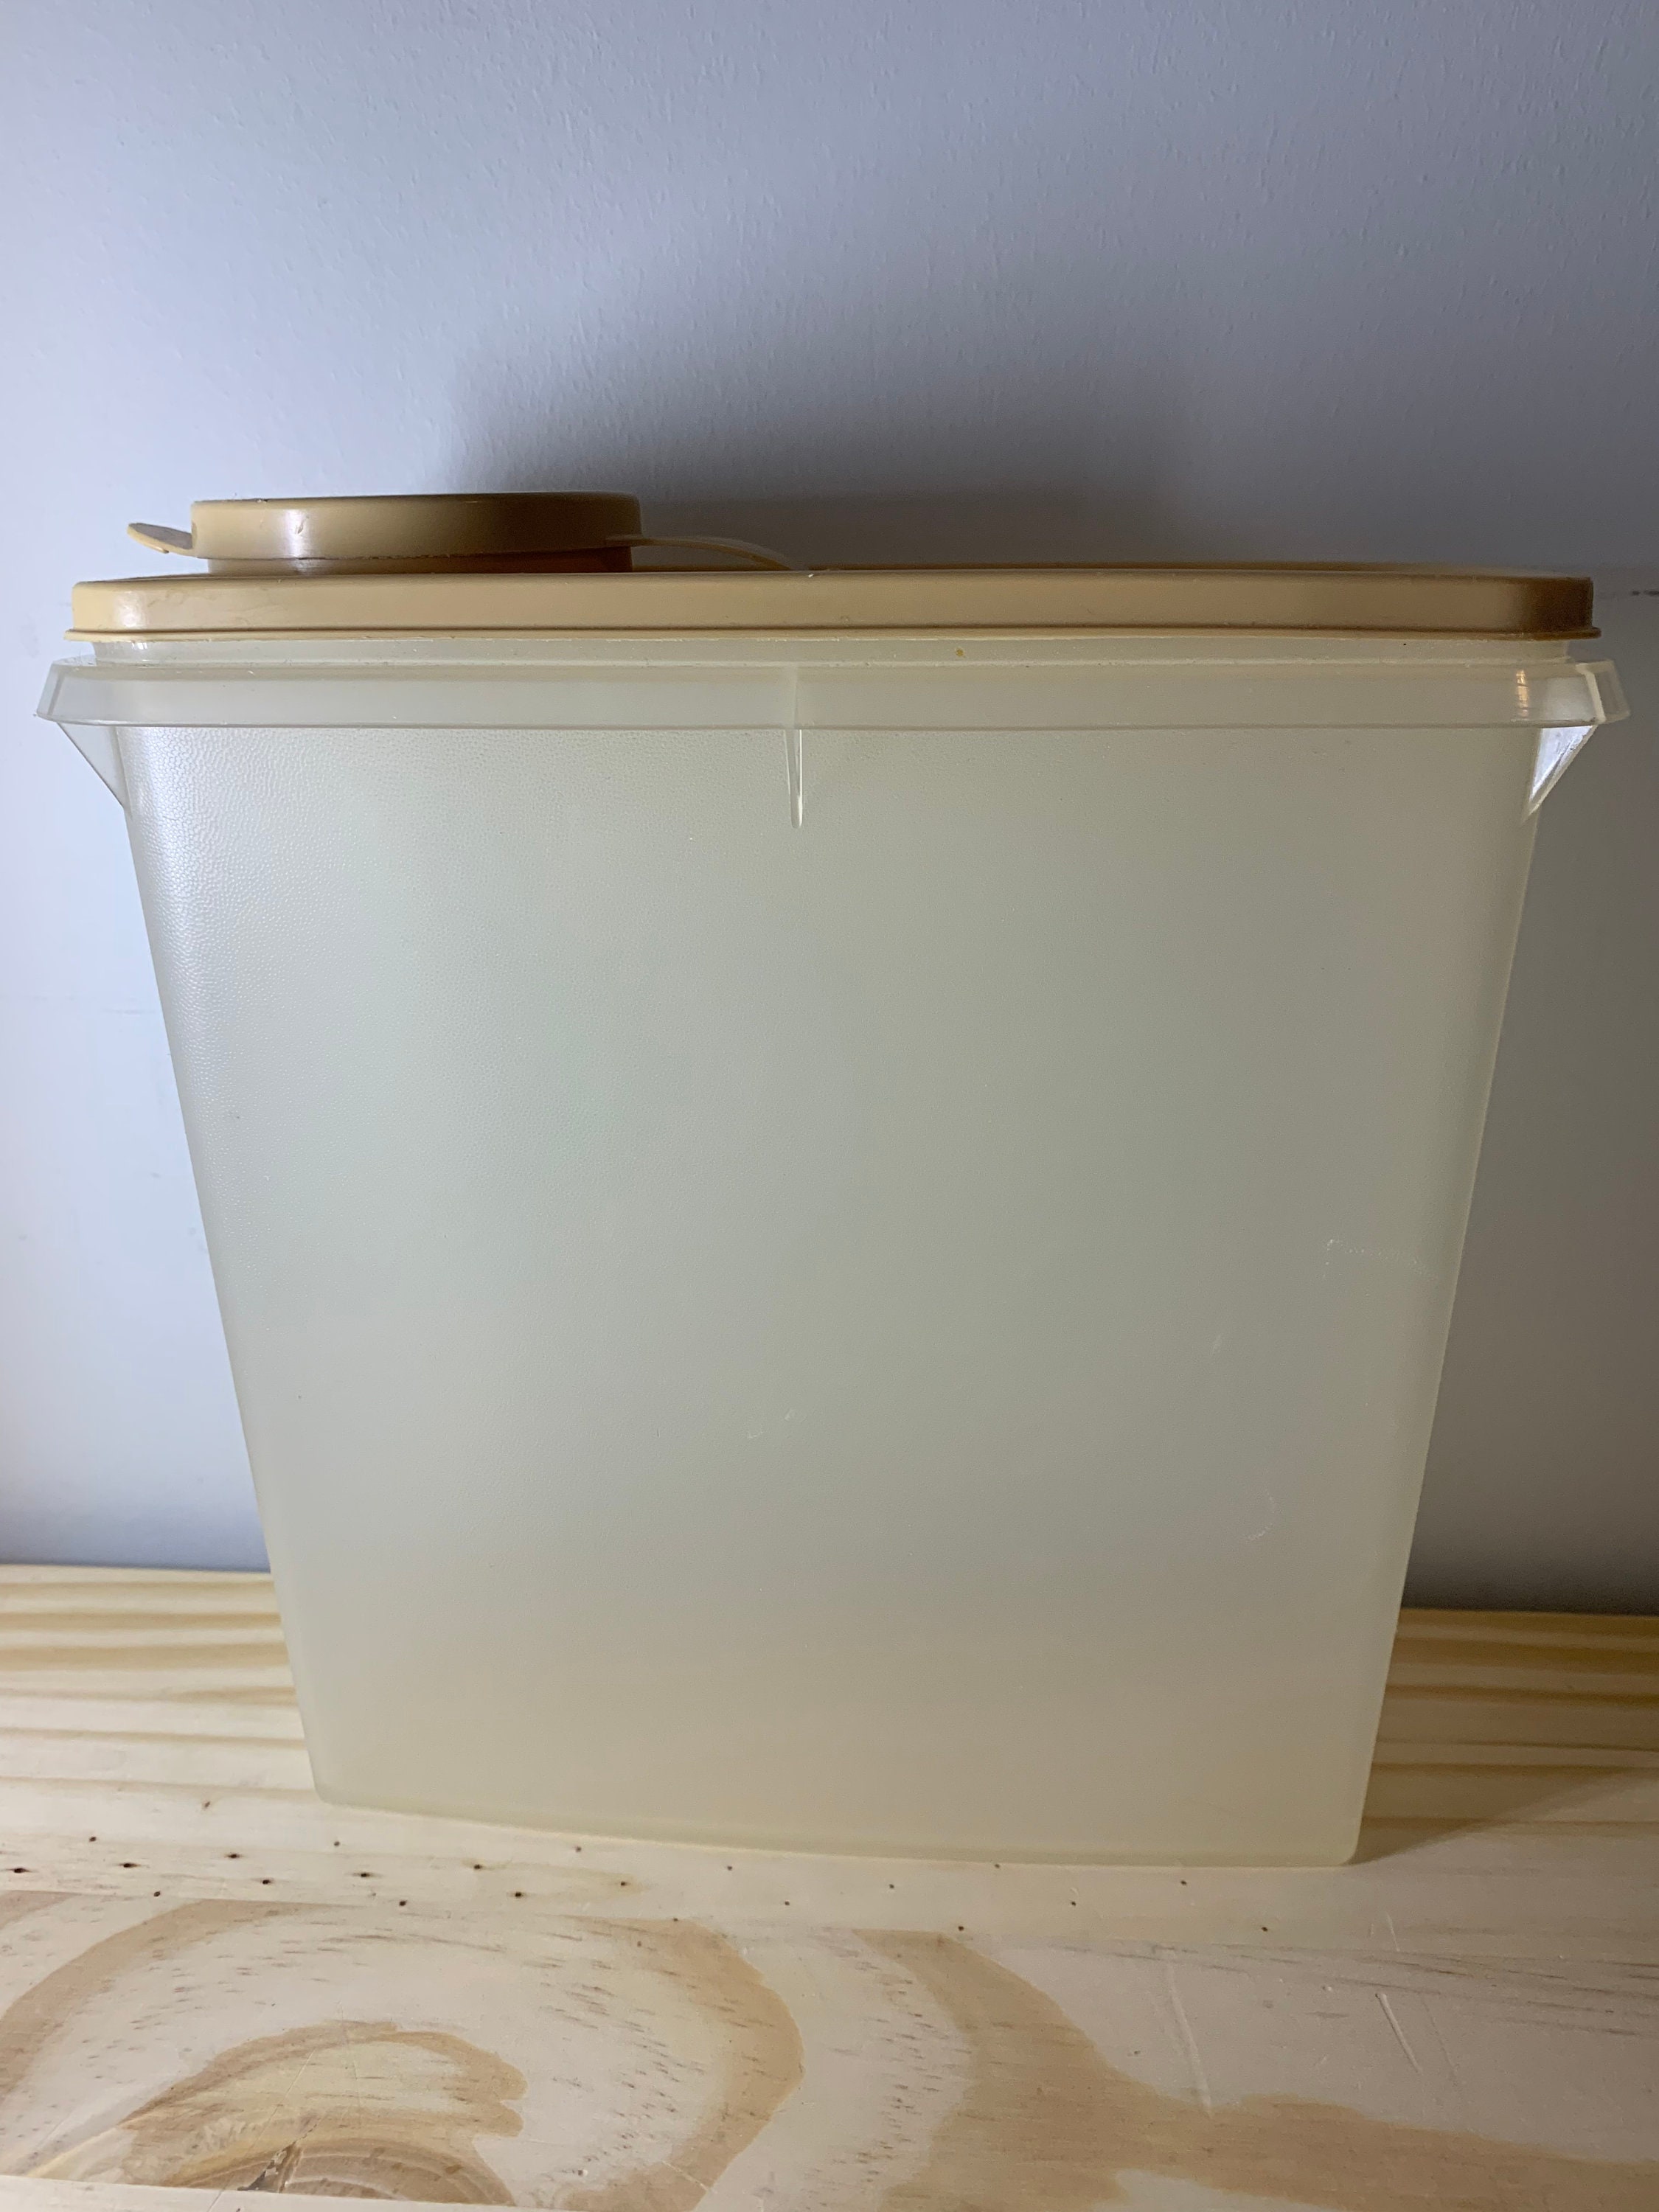 Dry Storage Containers – Tupperware US